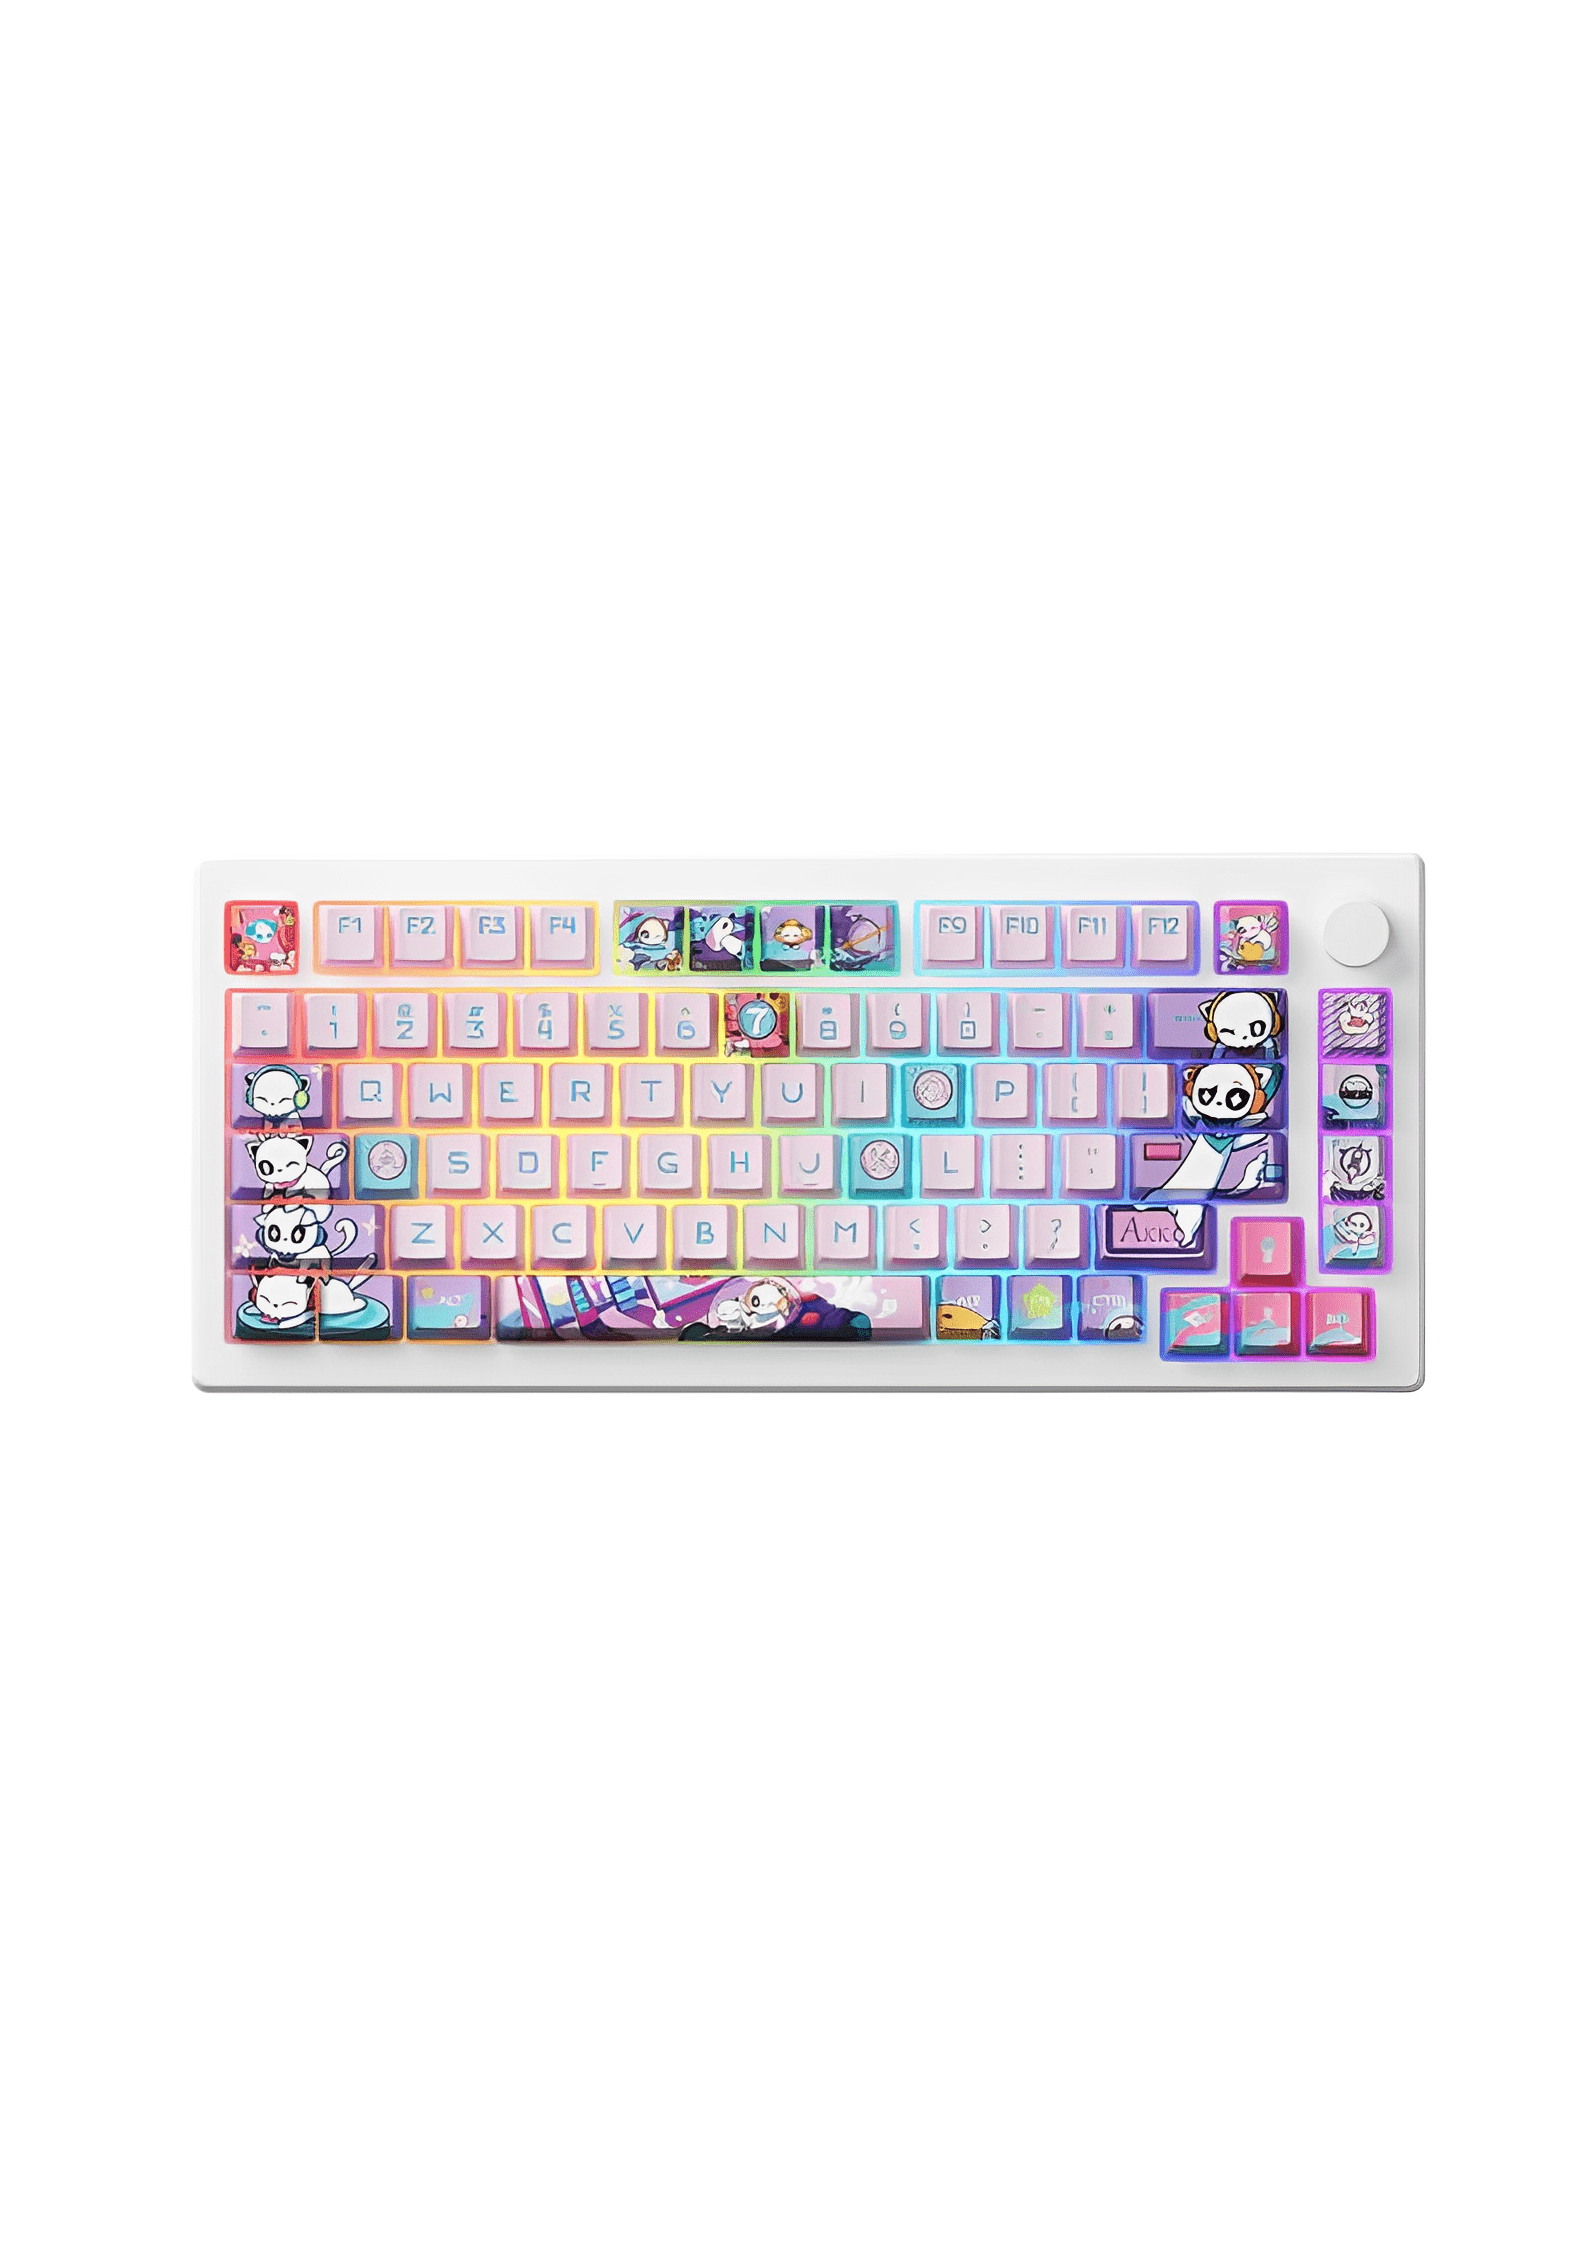 Akko Mod 007 7th Anv. Limited Edition Mechanical Keyboard (Magnetic Switch)